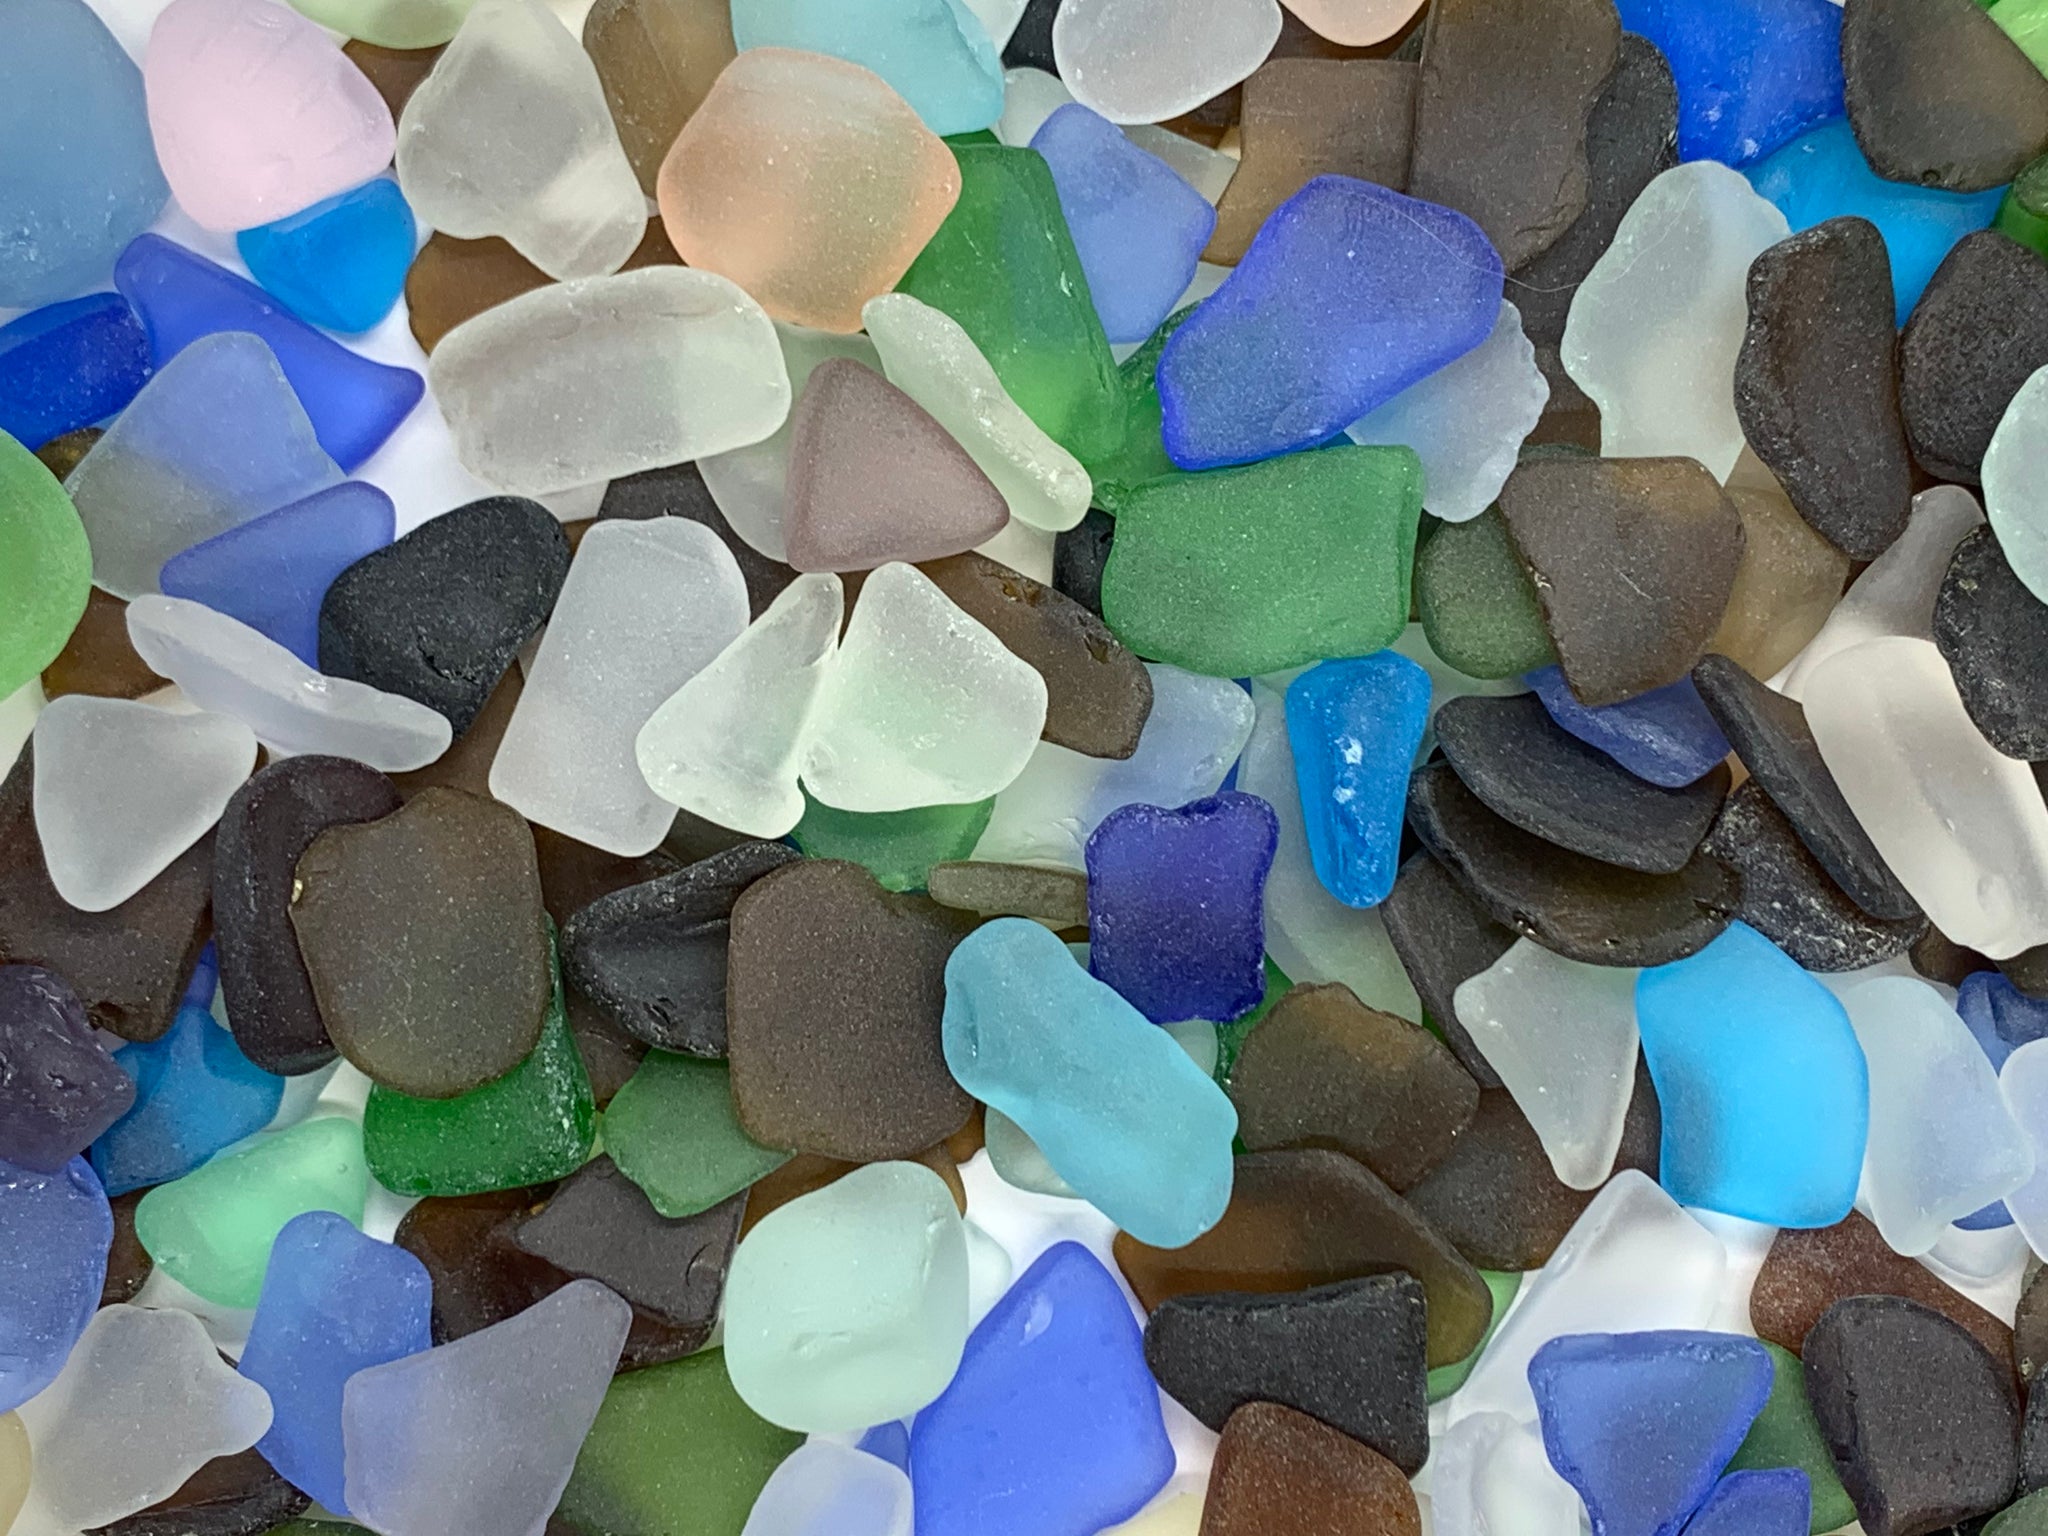 Large Sea Glass Beach Glass Ocean Tumbled Sea Glass Frosty Sea Glass for  Arts & Crafts Jewelry Glass 5-50 Pieces Seaglass 